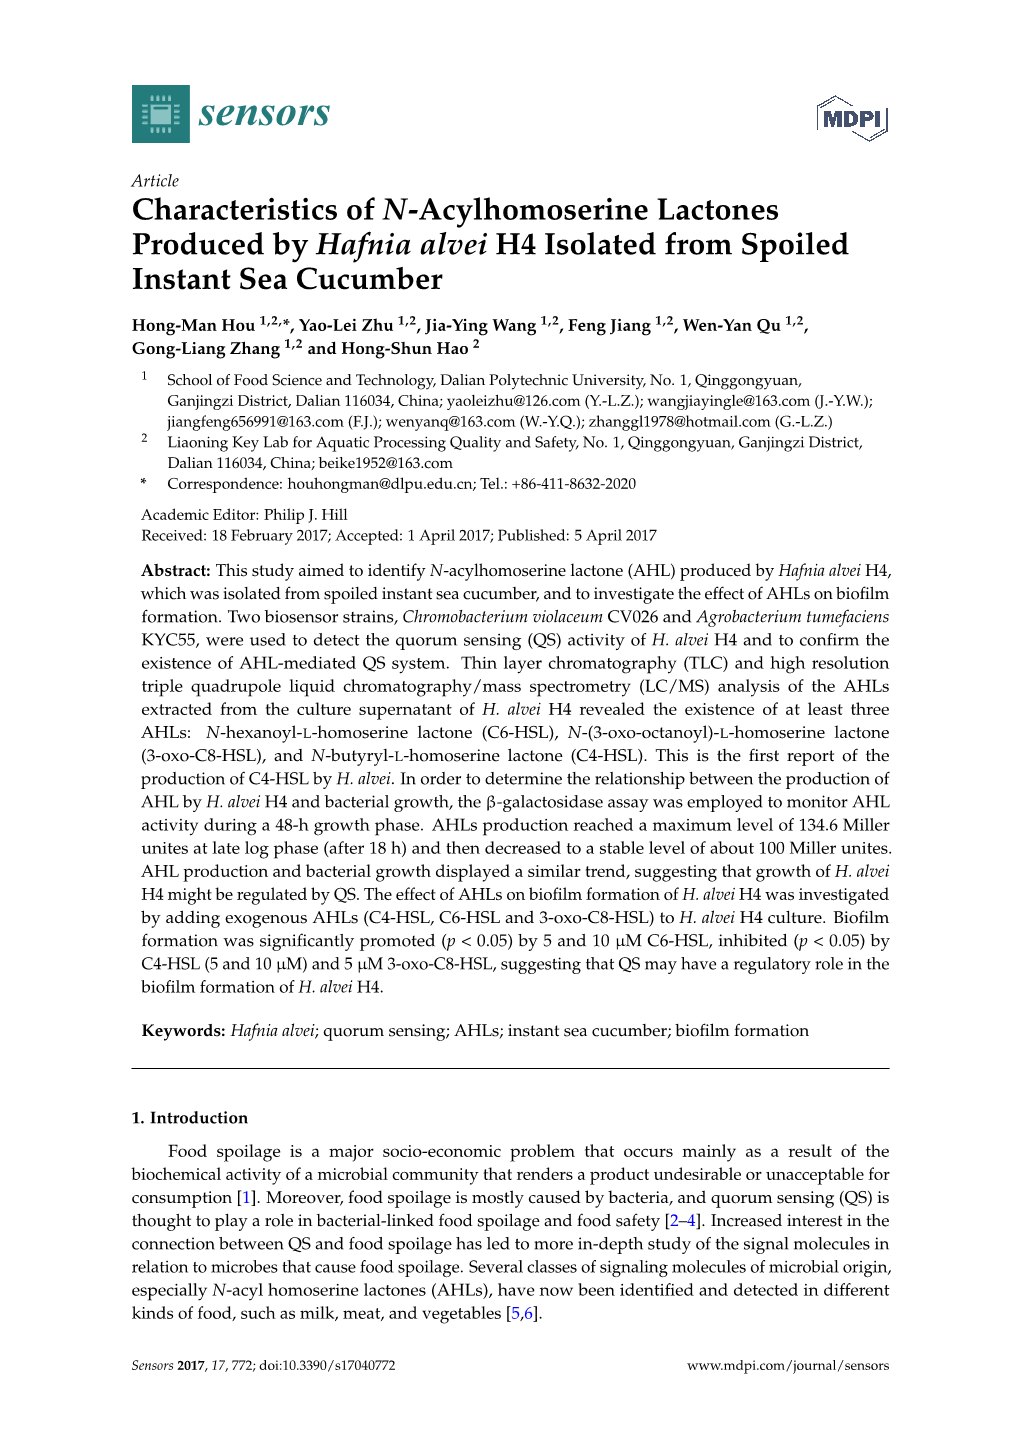 Characteristics of N-Acylhomoserine Lactones Produced by Hafnia Alvei H4 Isolated from Spoiled Instant Sea Cucumber-4Pt